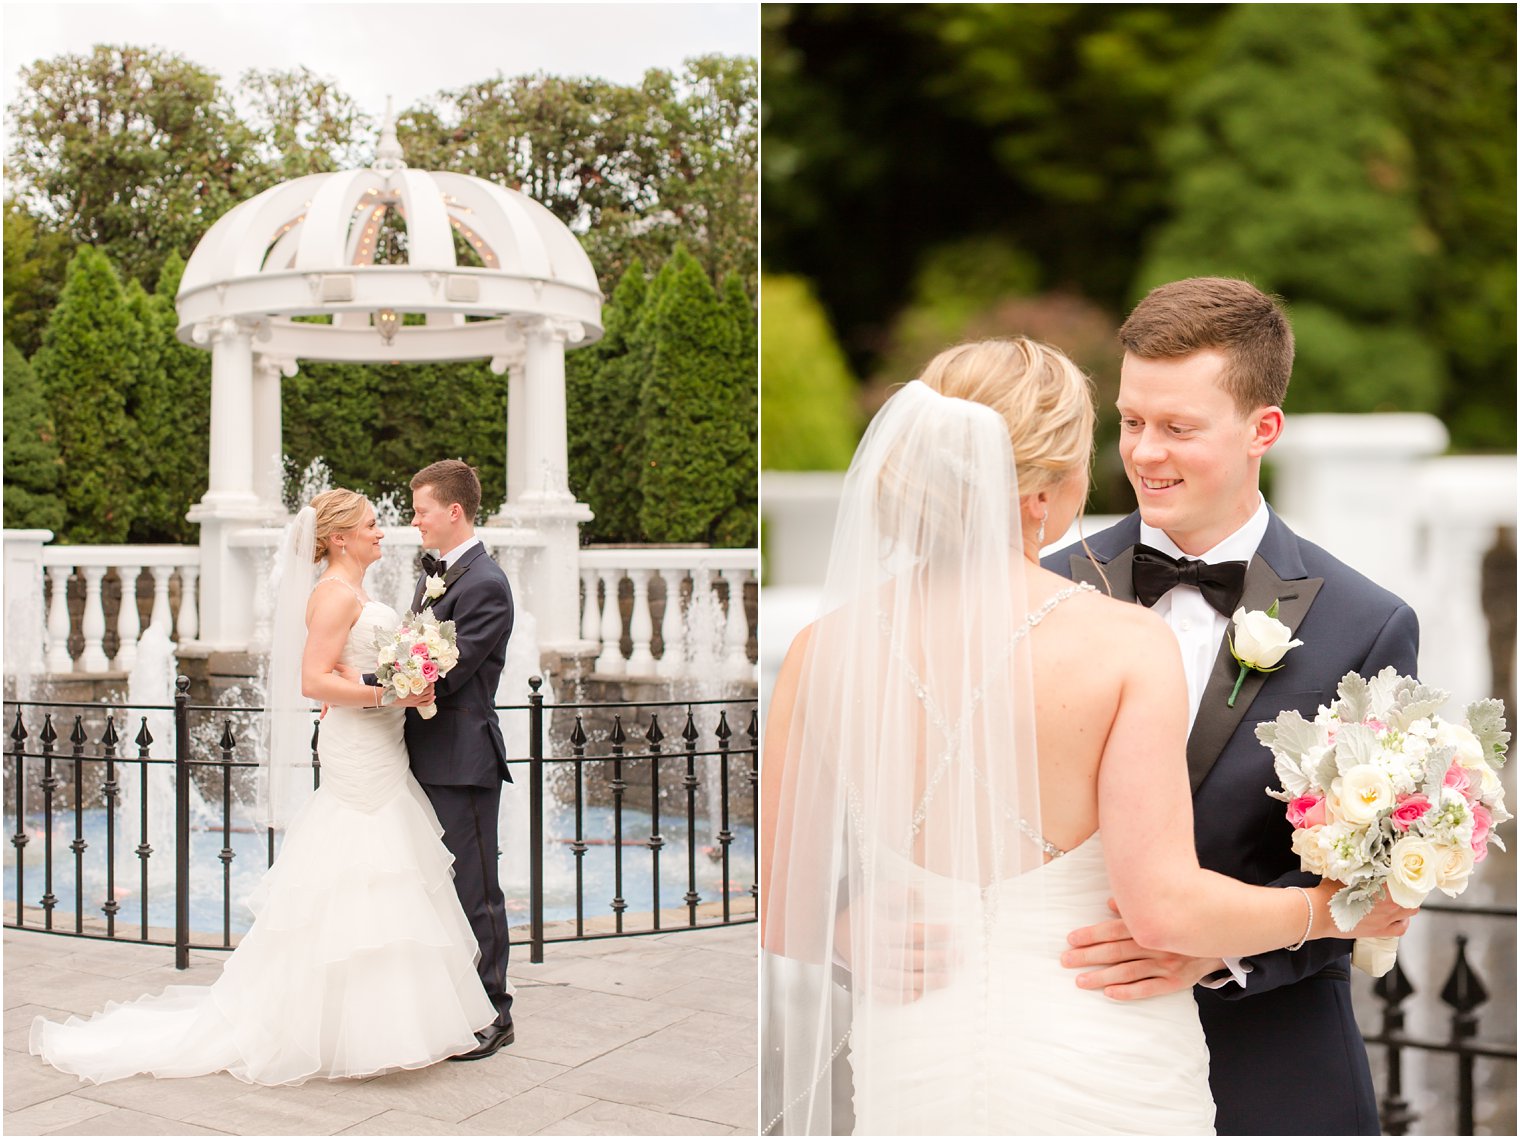 Bride and groom portraits in Woodland Park, NJ